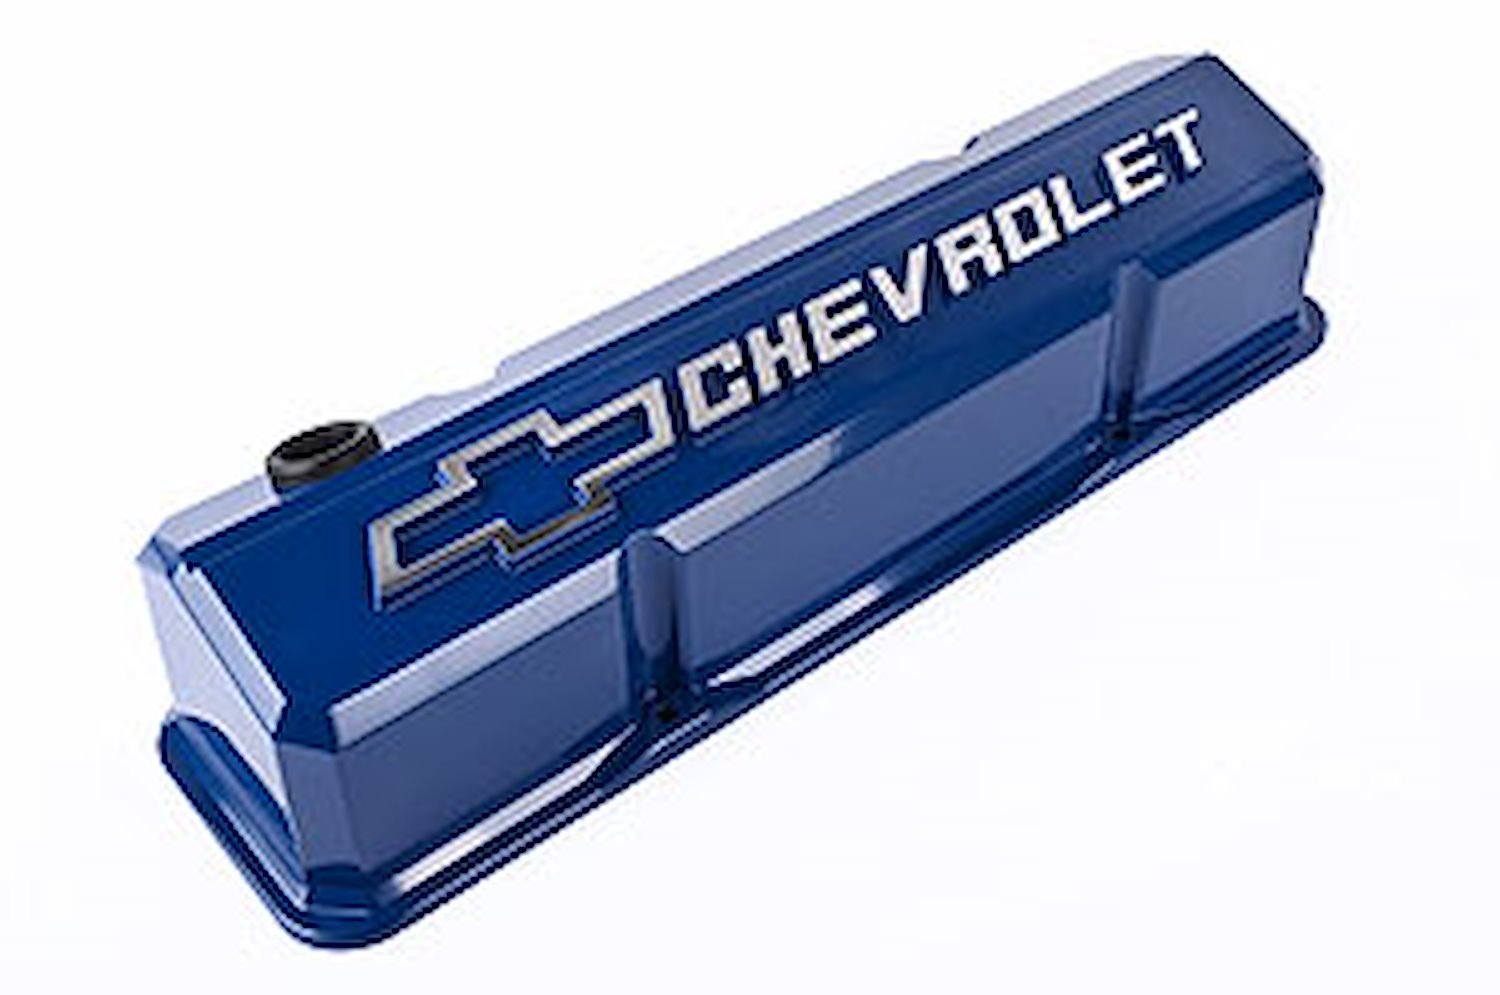 Die-Cast Slant-Edge Valve Covers for 1958-1986 Small Block Chevy with Chevrolet/Bowtie Raised Emblem in Blue Finish